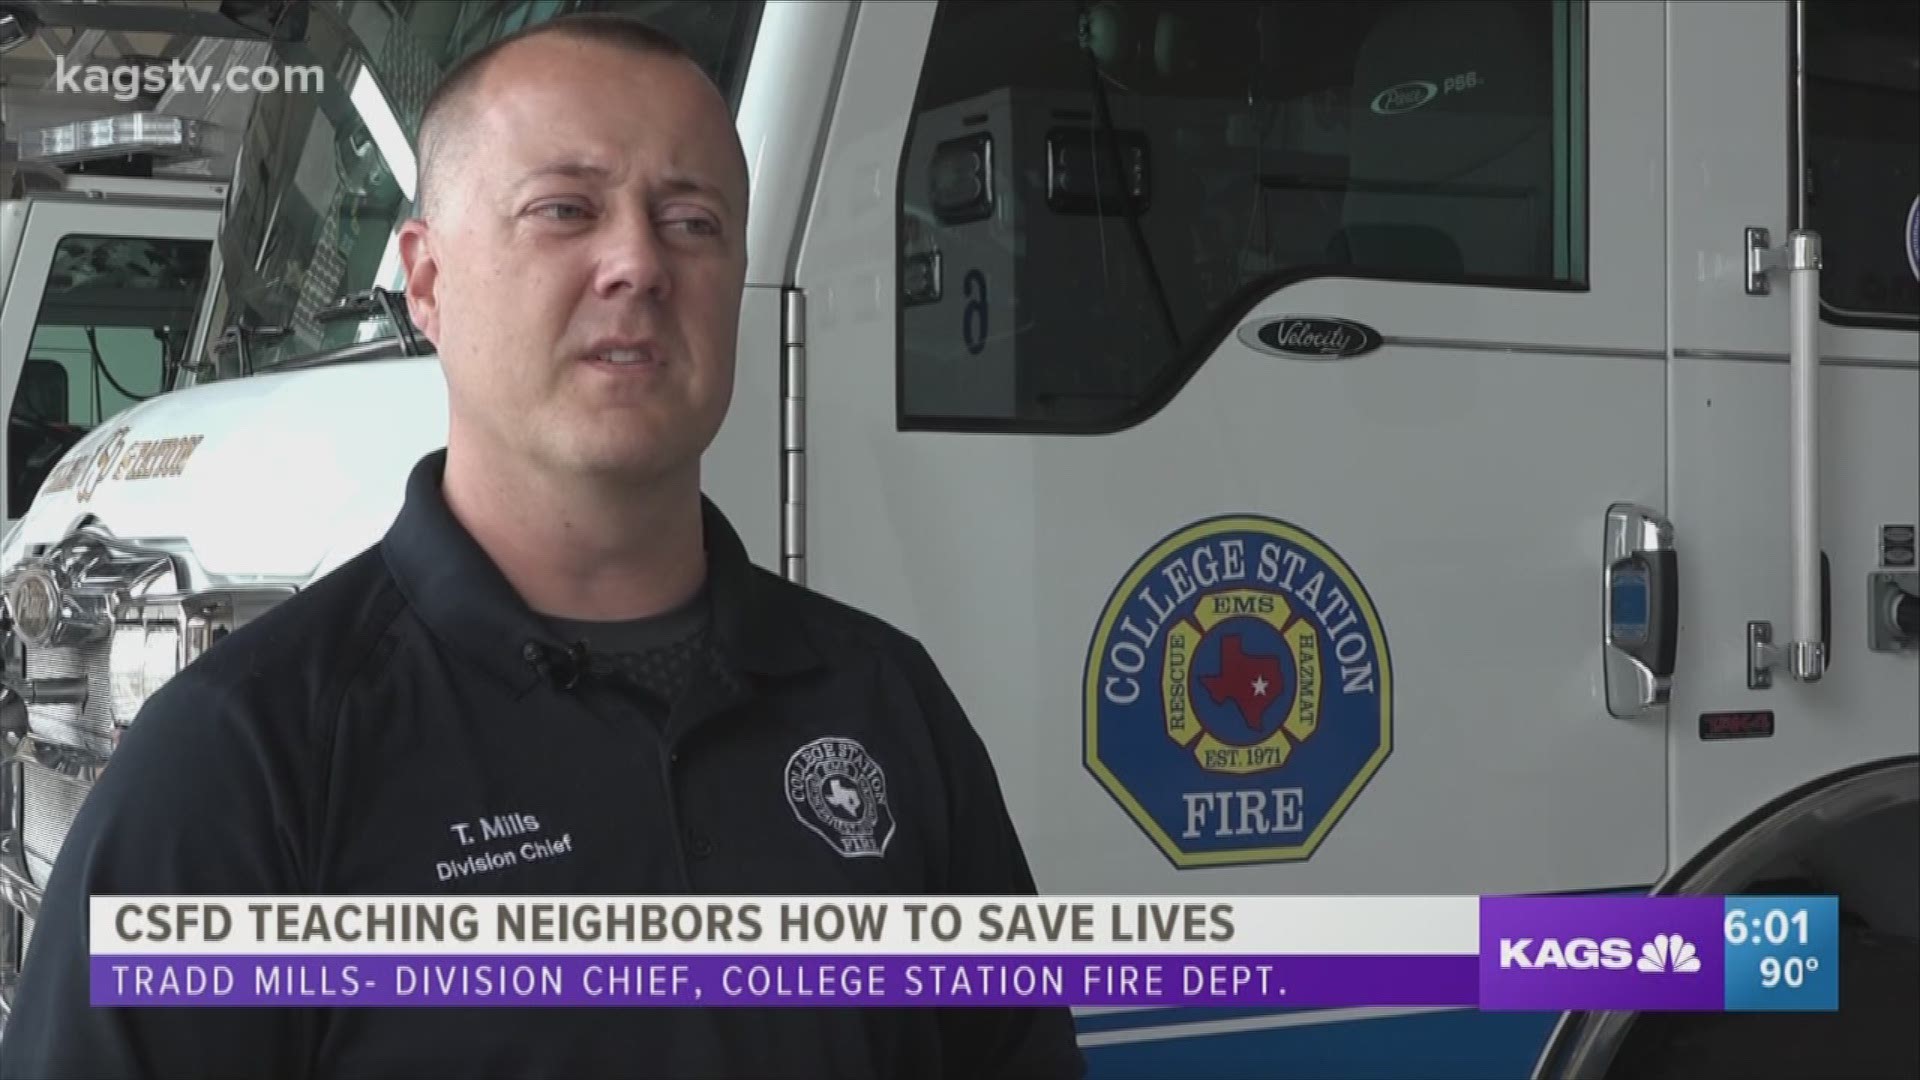 The College Station Fire Department spend the day teaching members of the community how to intervene before help arrives.